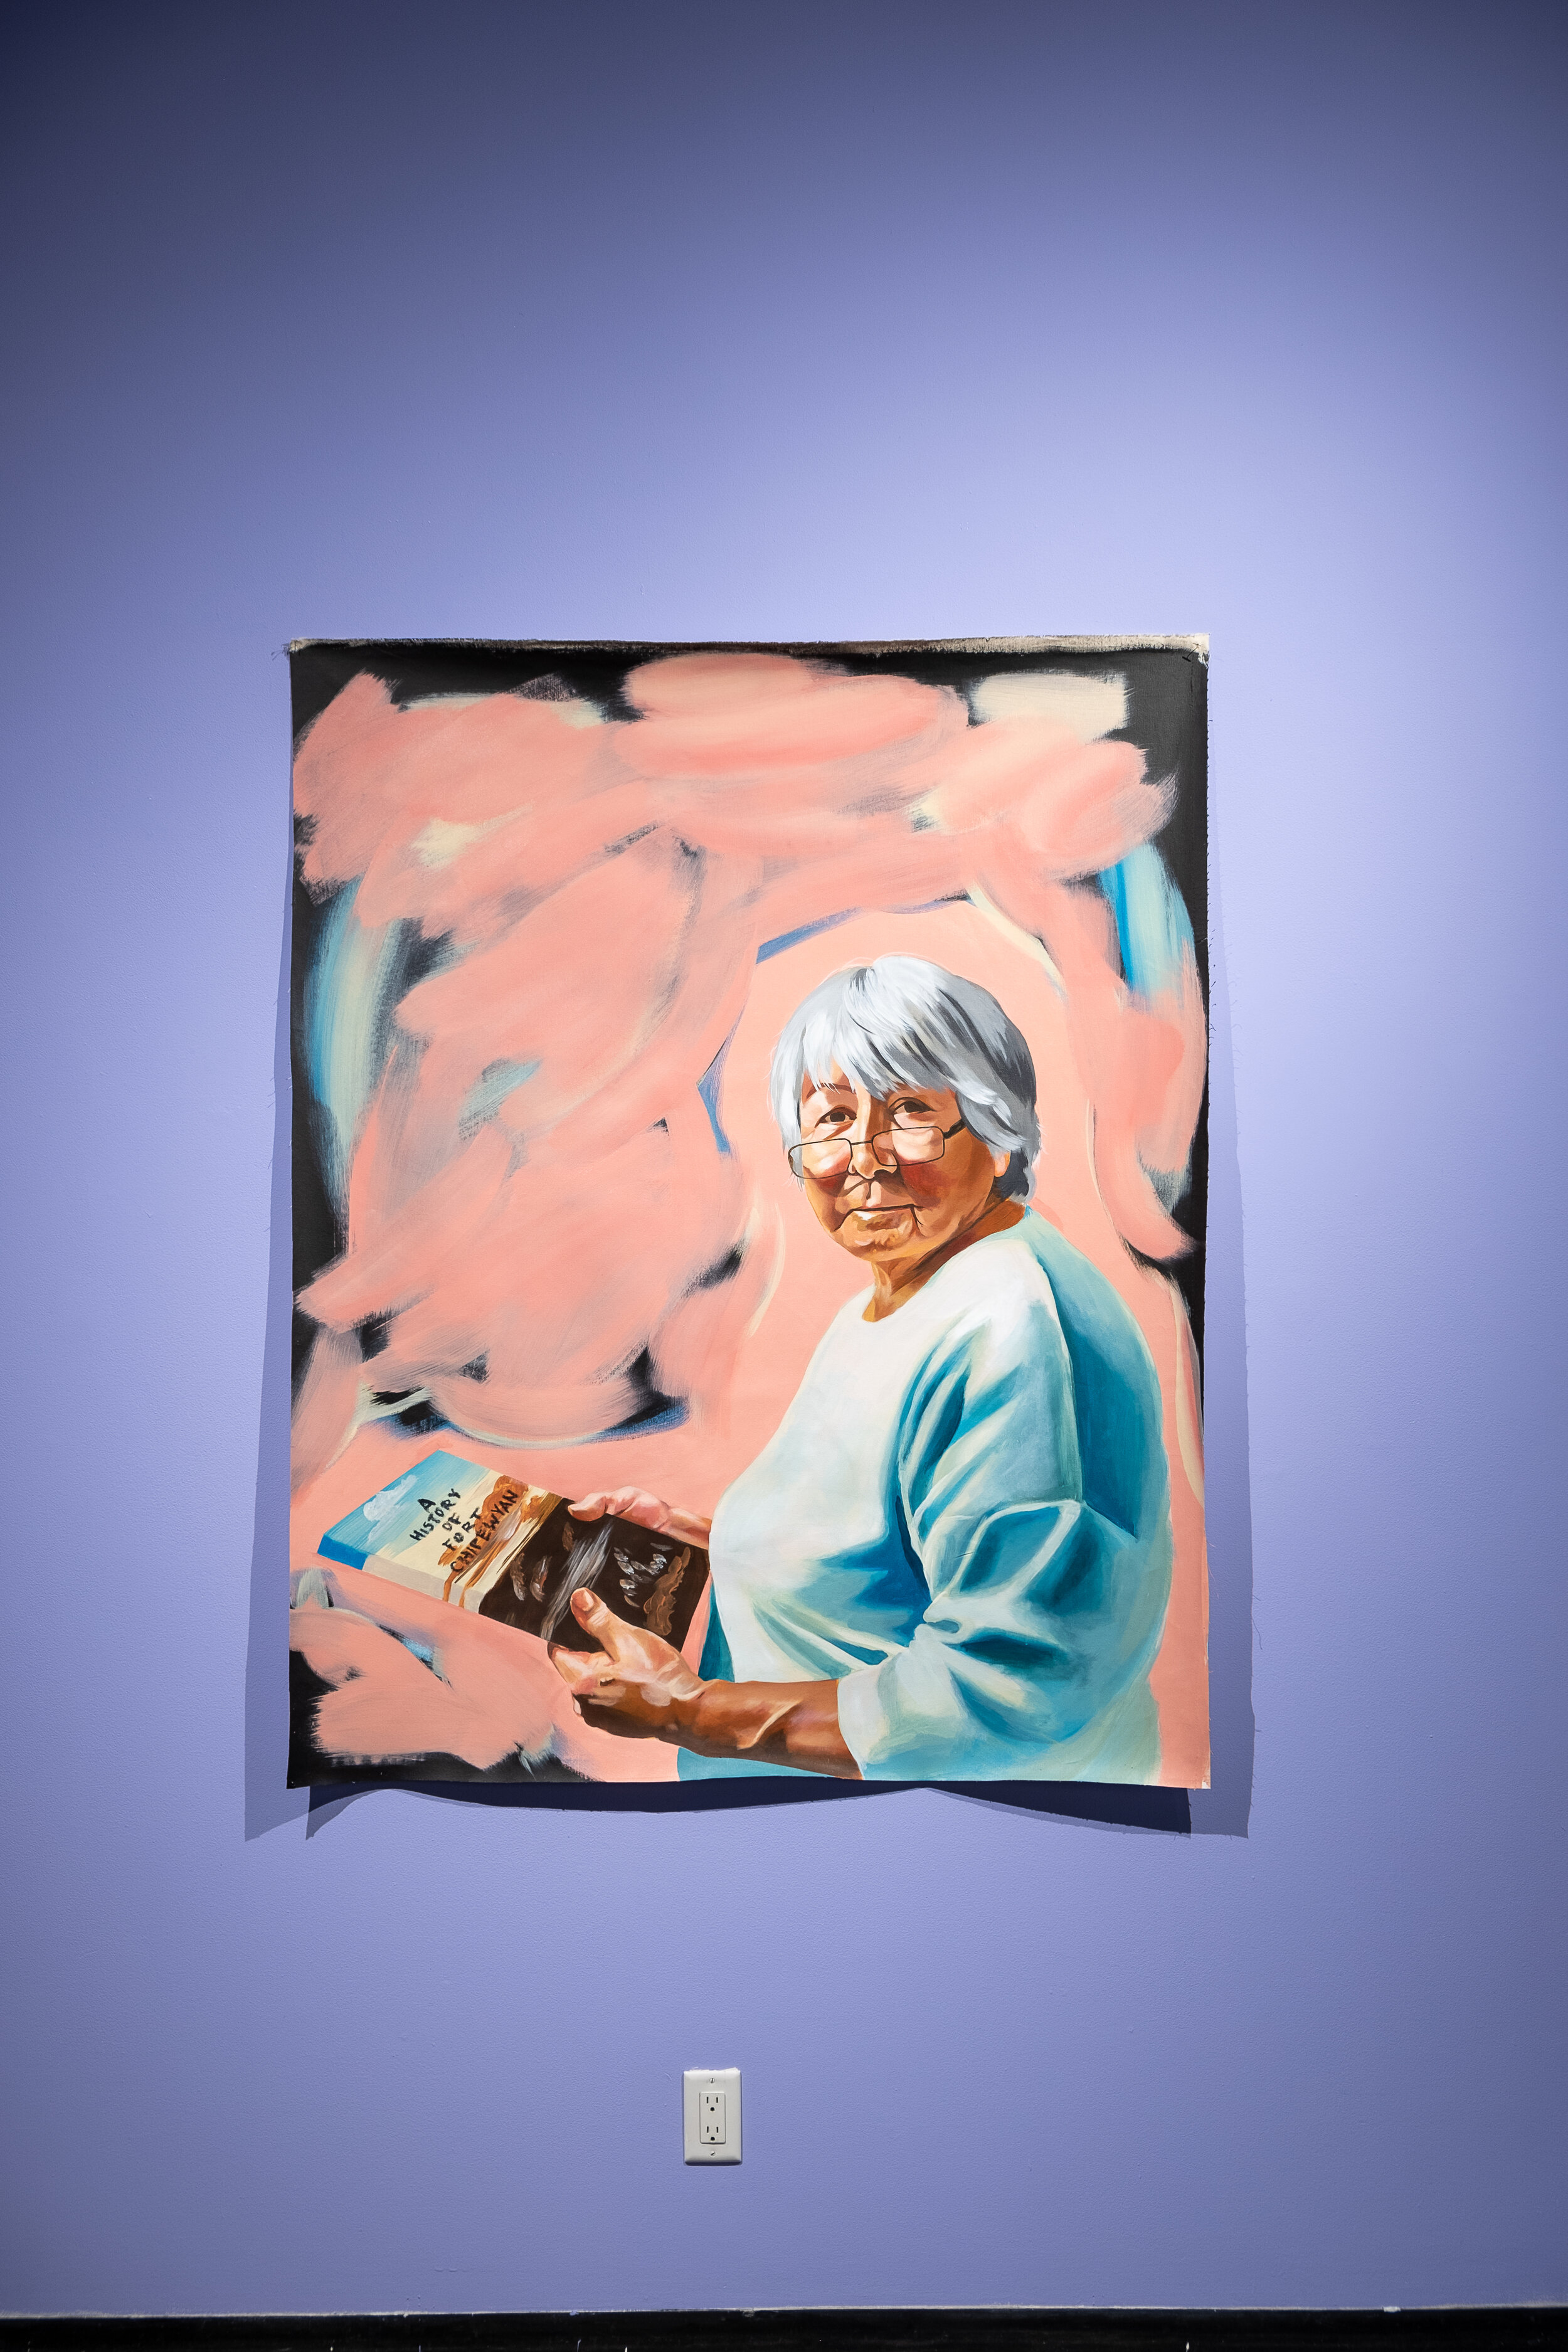  A painting of an old woman with warm, tanned skin, light grey hair, dark eyes, and a rounded face. The woman wears a long-sleeved, light blue shirt, and thin, black square glasses. Her body is turned away from us to the left of the painting but she 